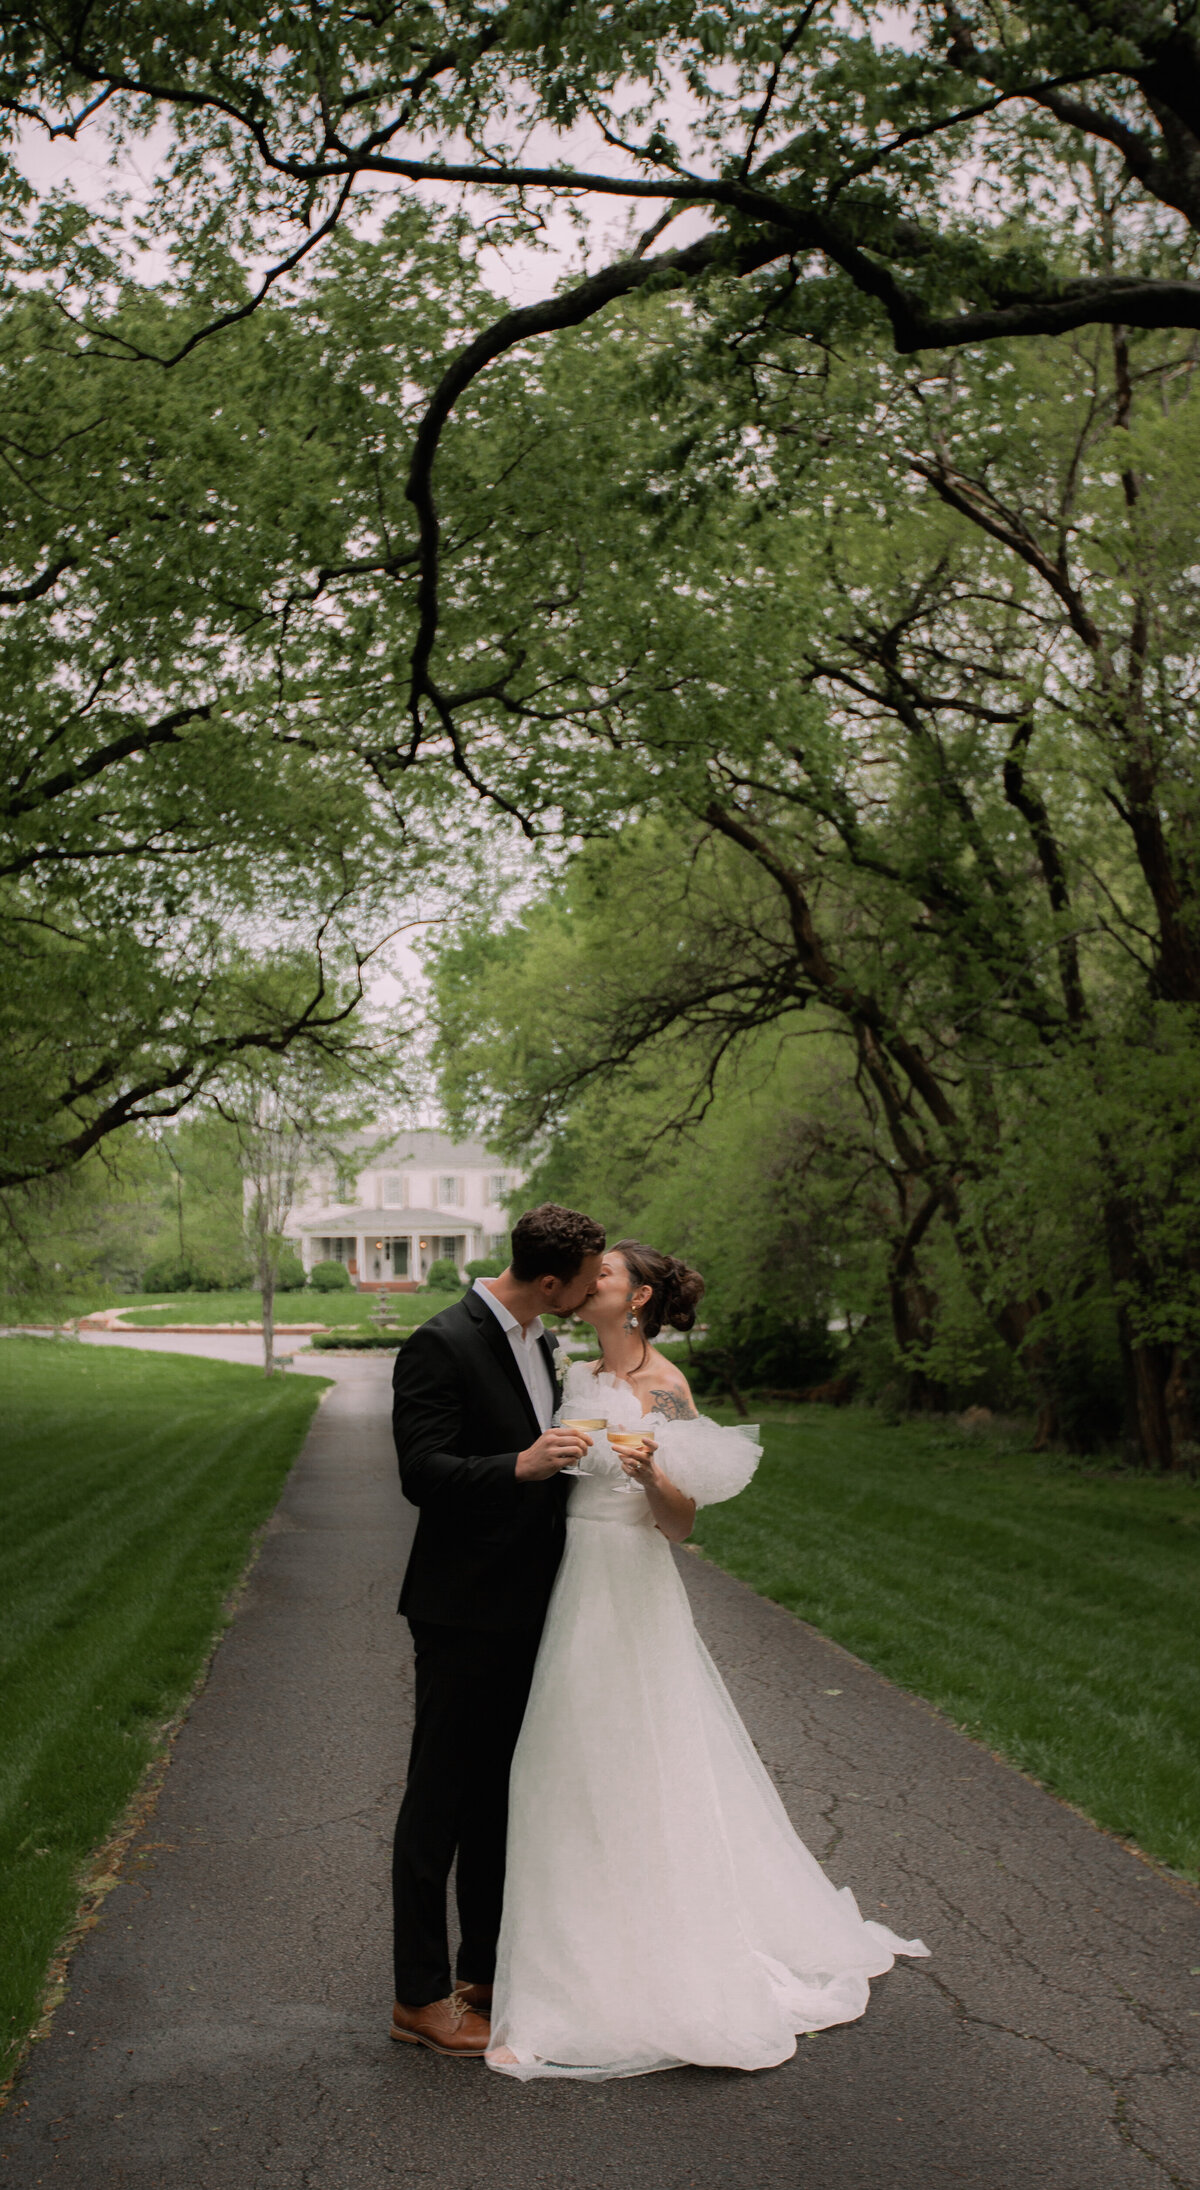 Tennessee Manor Wedding in Knoxville. Dana Photo Co. Inquire now